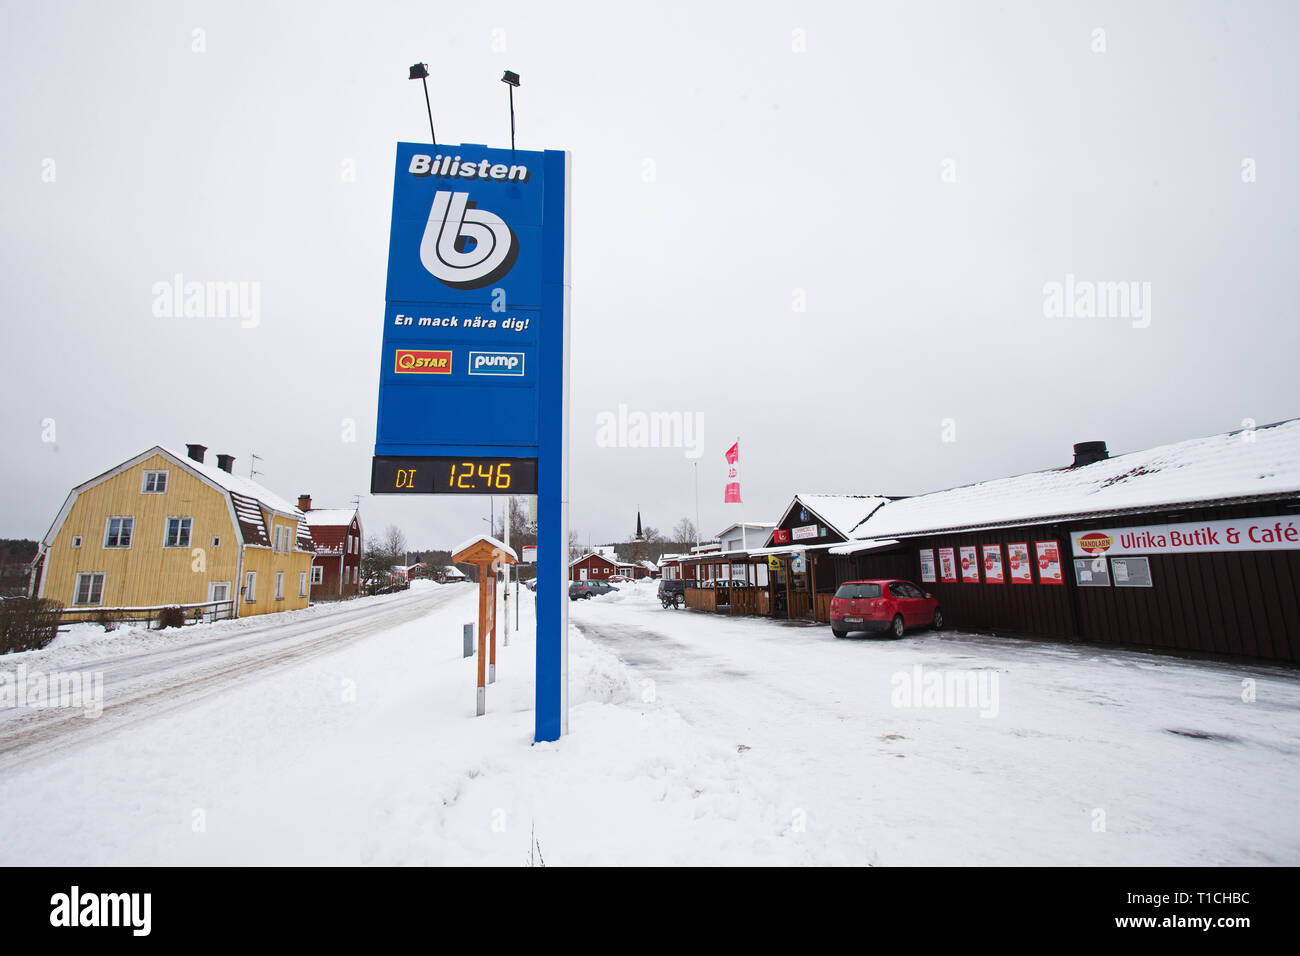 ULRIKA 20150128 Billisten gas station in the countryside. Photo Jeppe Gustafsson Stock Photo